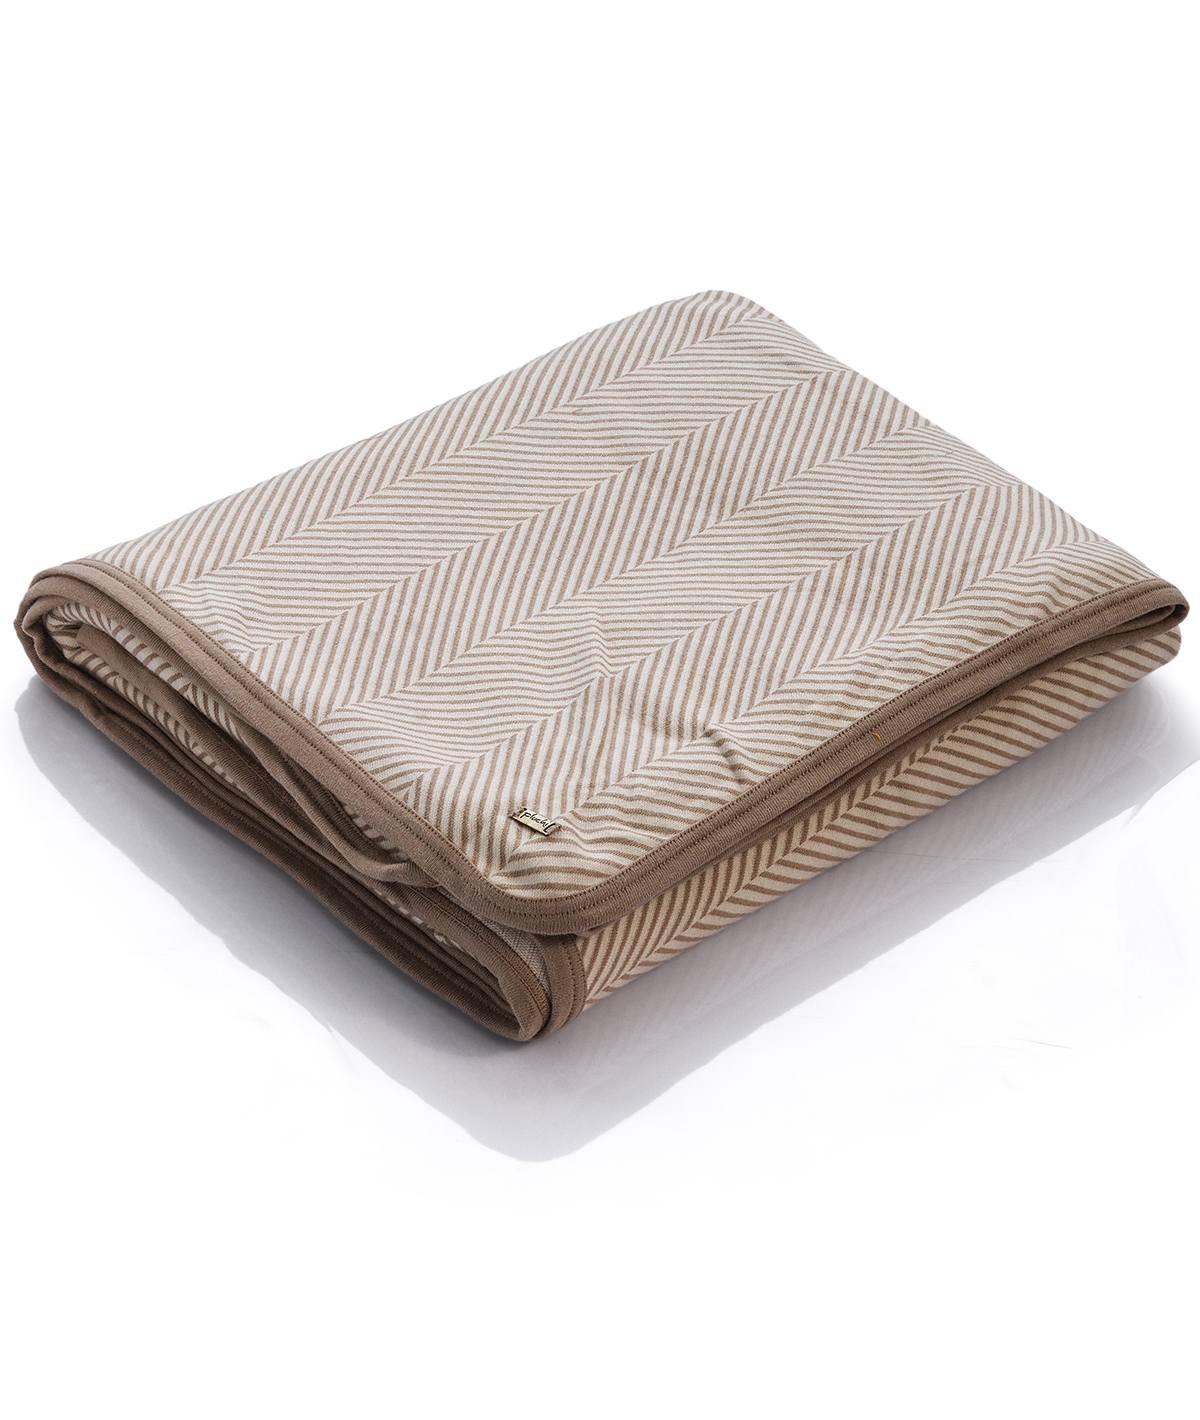 Pluchi Herringbone - Stone & Natural Combed Cotton Knitted King Size Bed Cover / Ac Blanket Set (1 Bedcover / Ac Blanket , 2 Pillow Covers, 1 Cushion Cover) - Agarwal Bedding and Furnishing